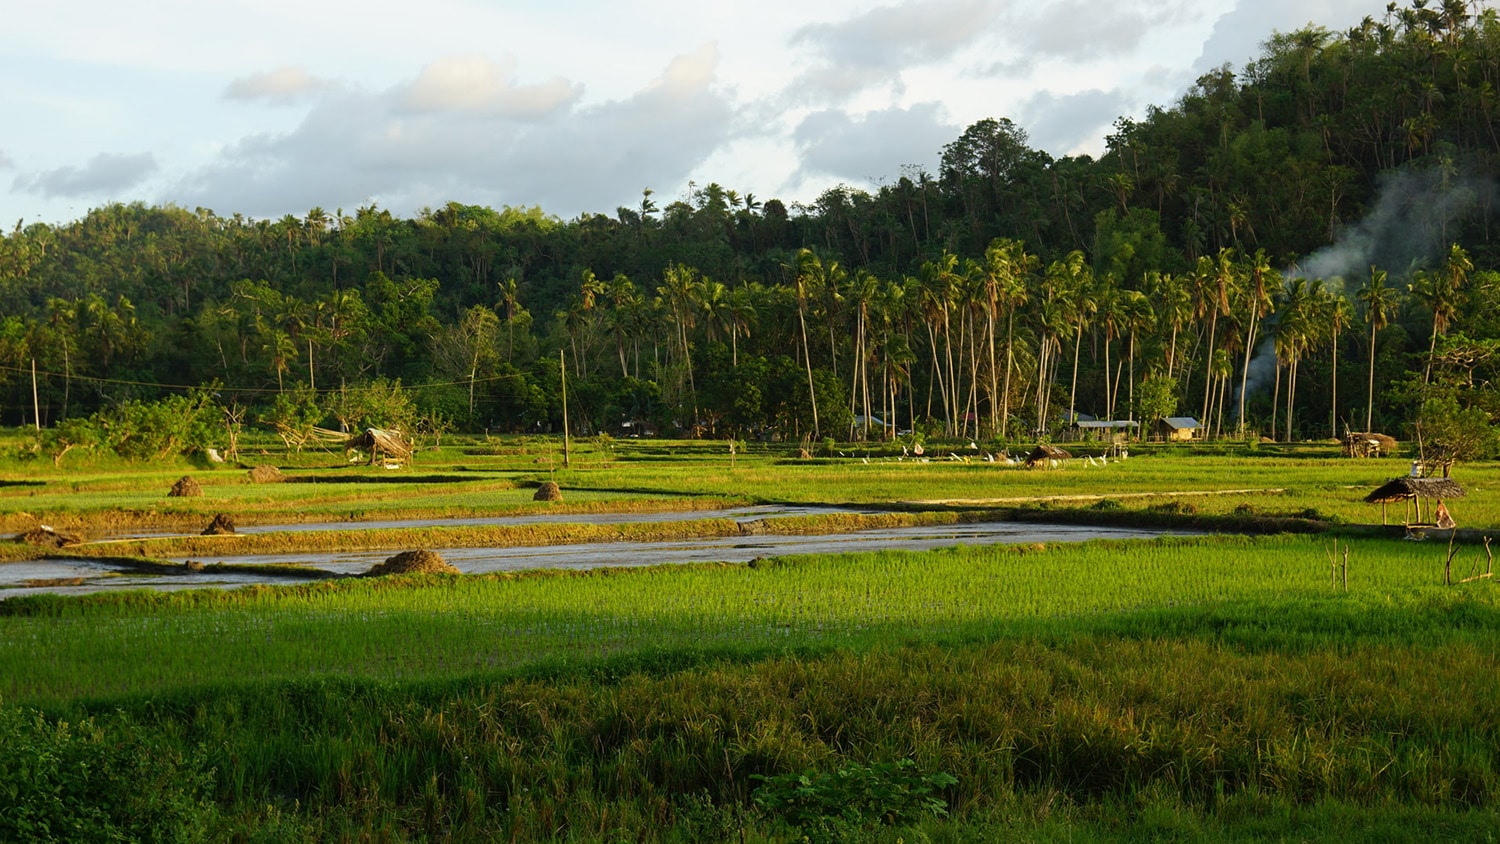 A rice field in the Philippines.